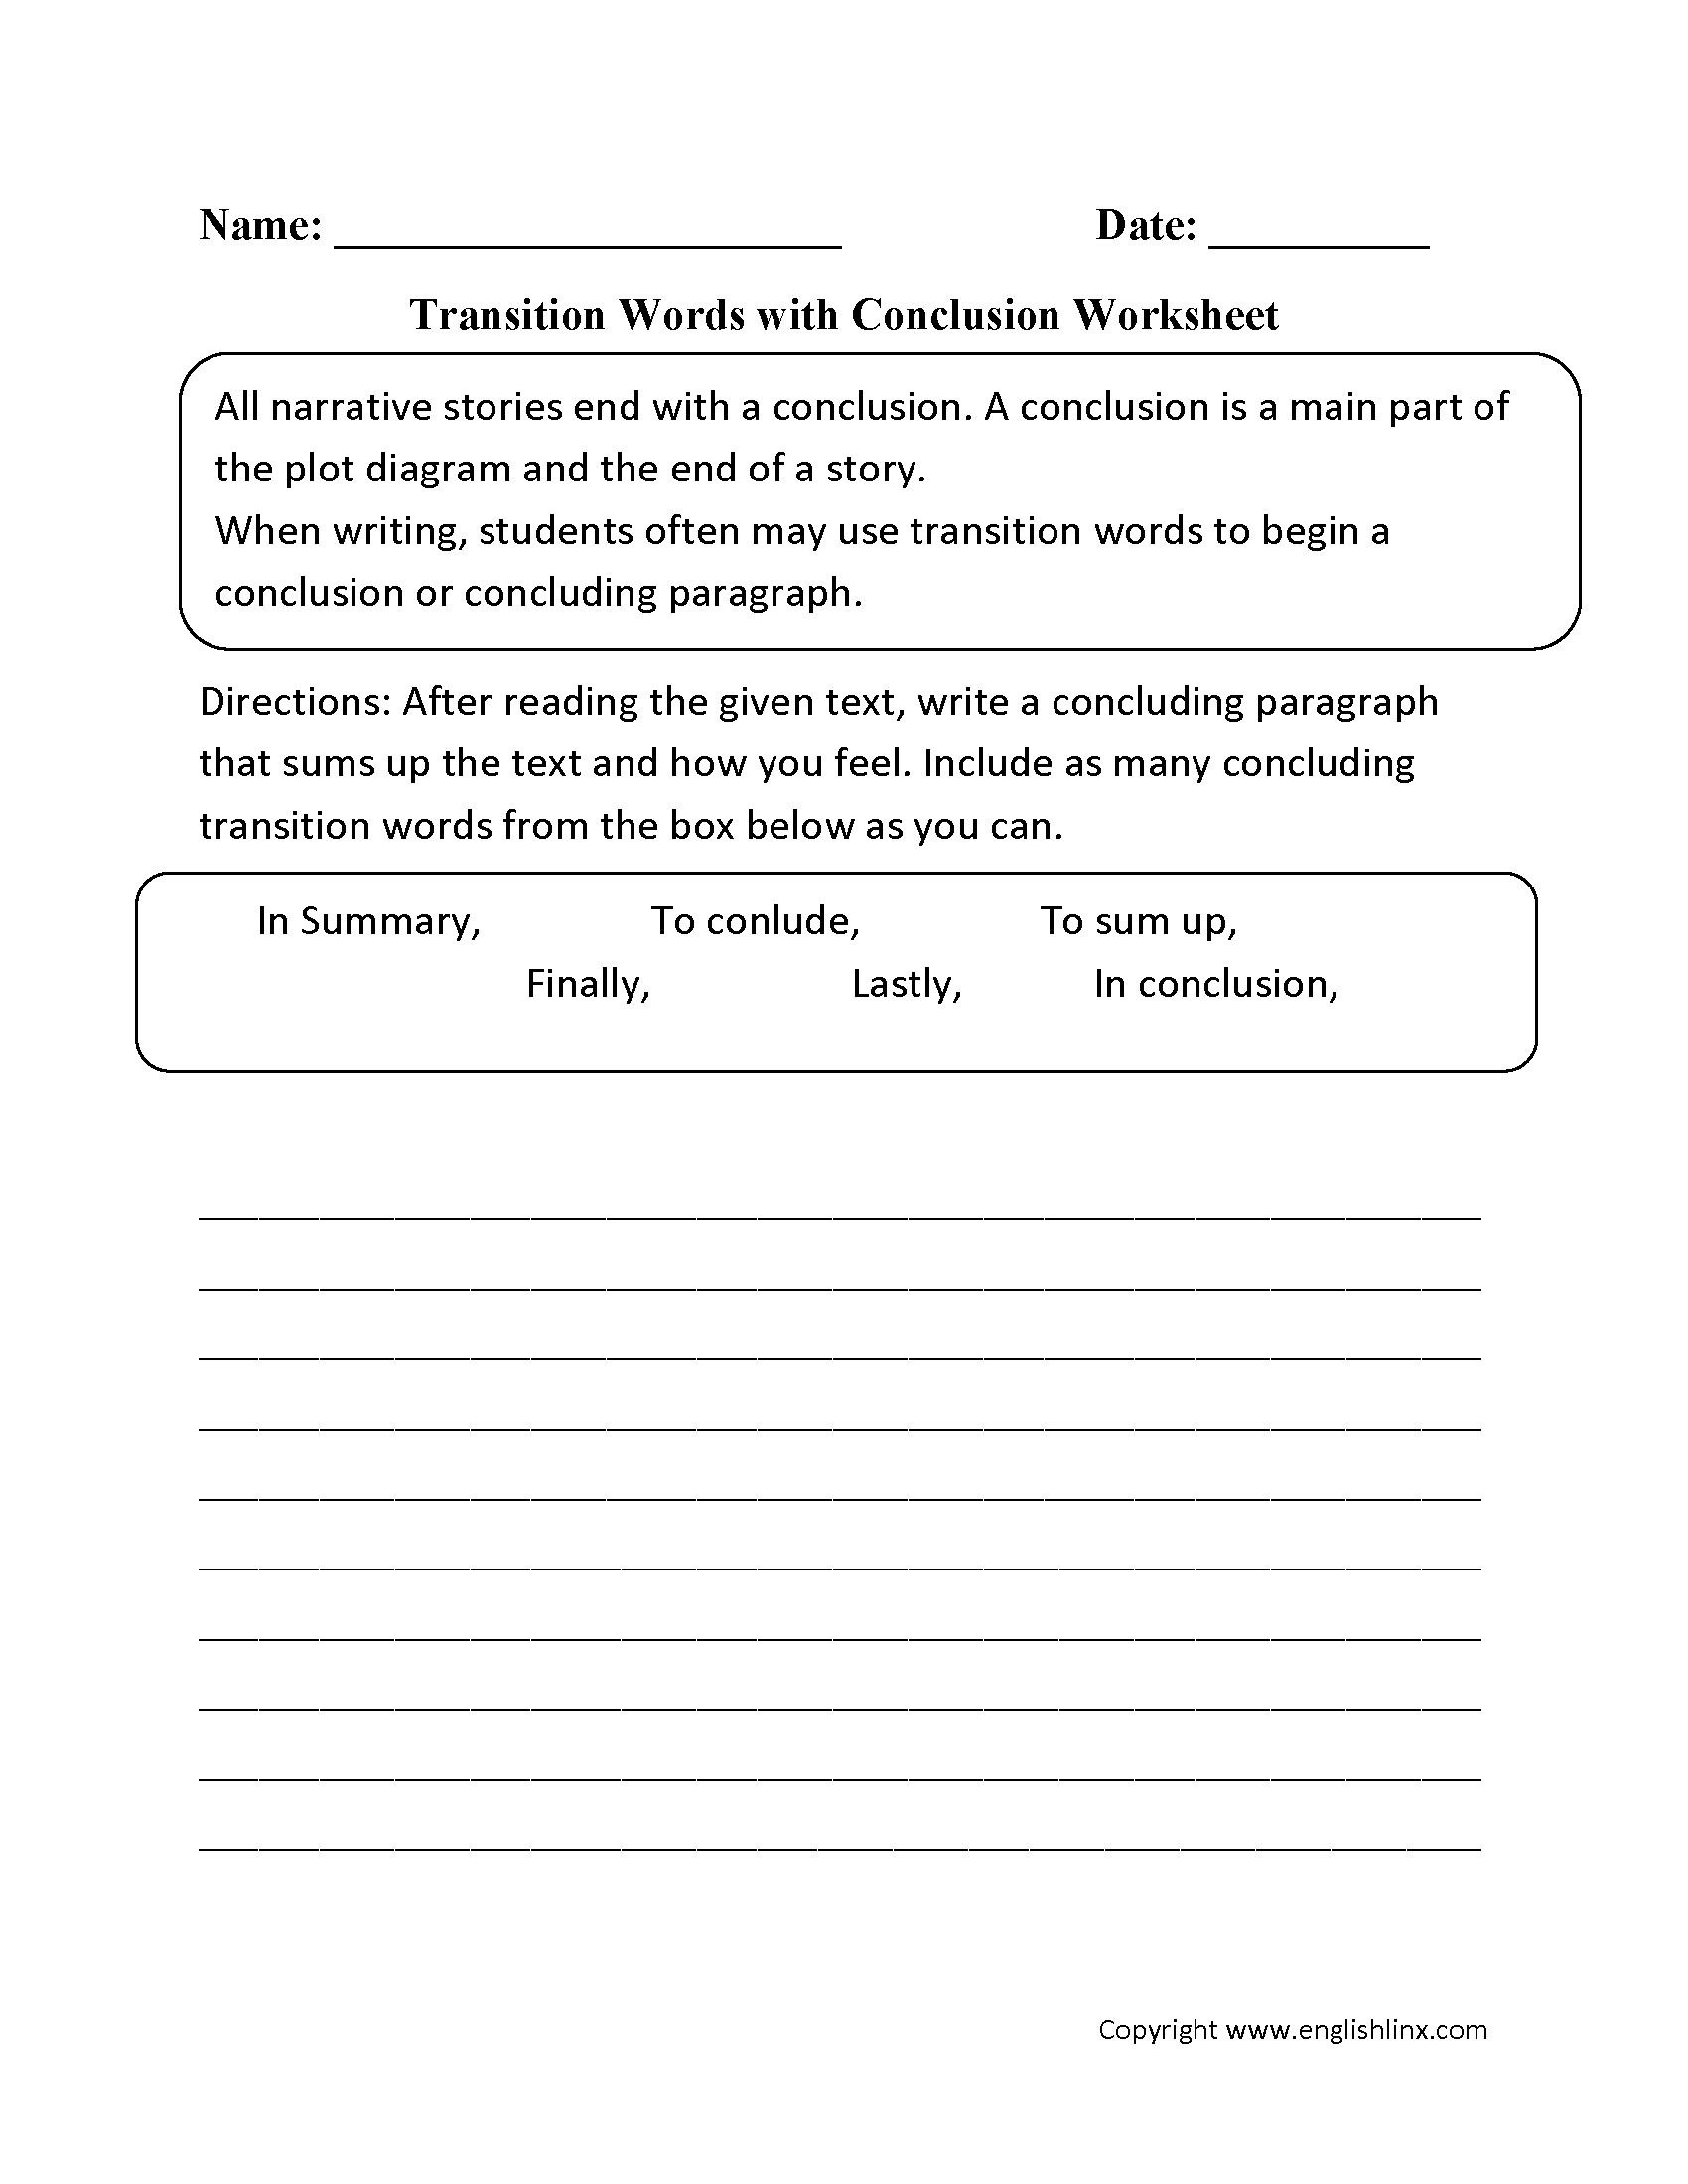 reading-worksheets-drawing-conclusions-worksheets